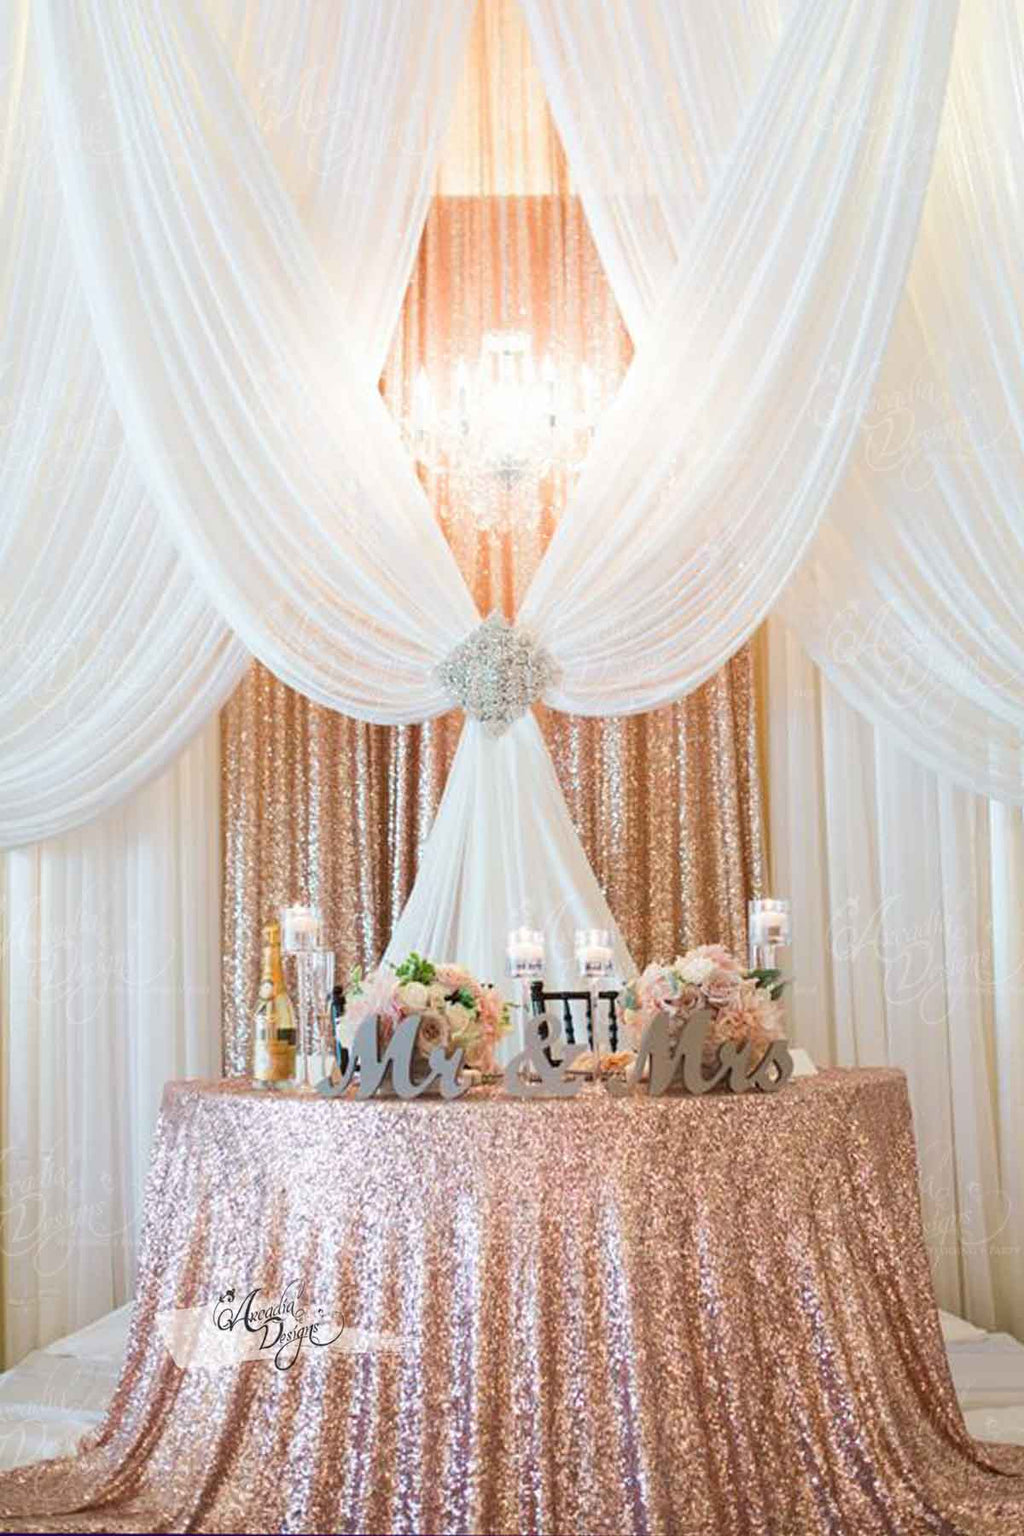 Arcadia Designs Pink and Gold Wedding Drapes 4 W  x  6 L  ft